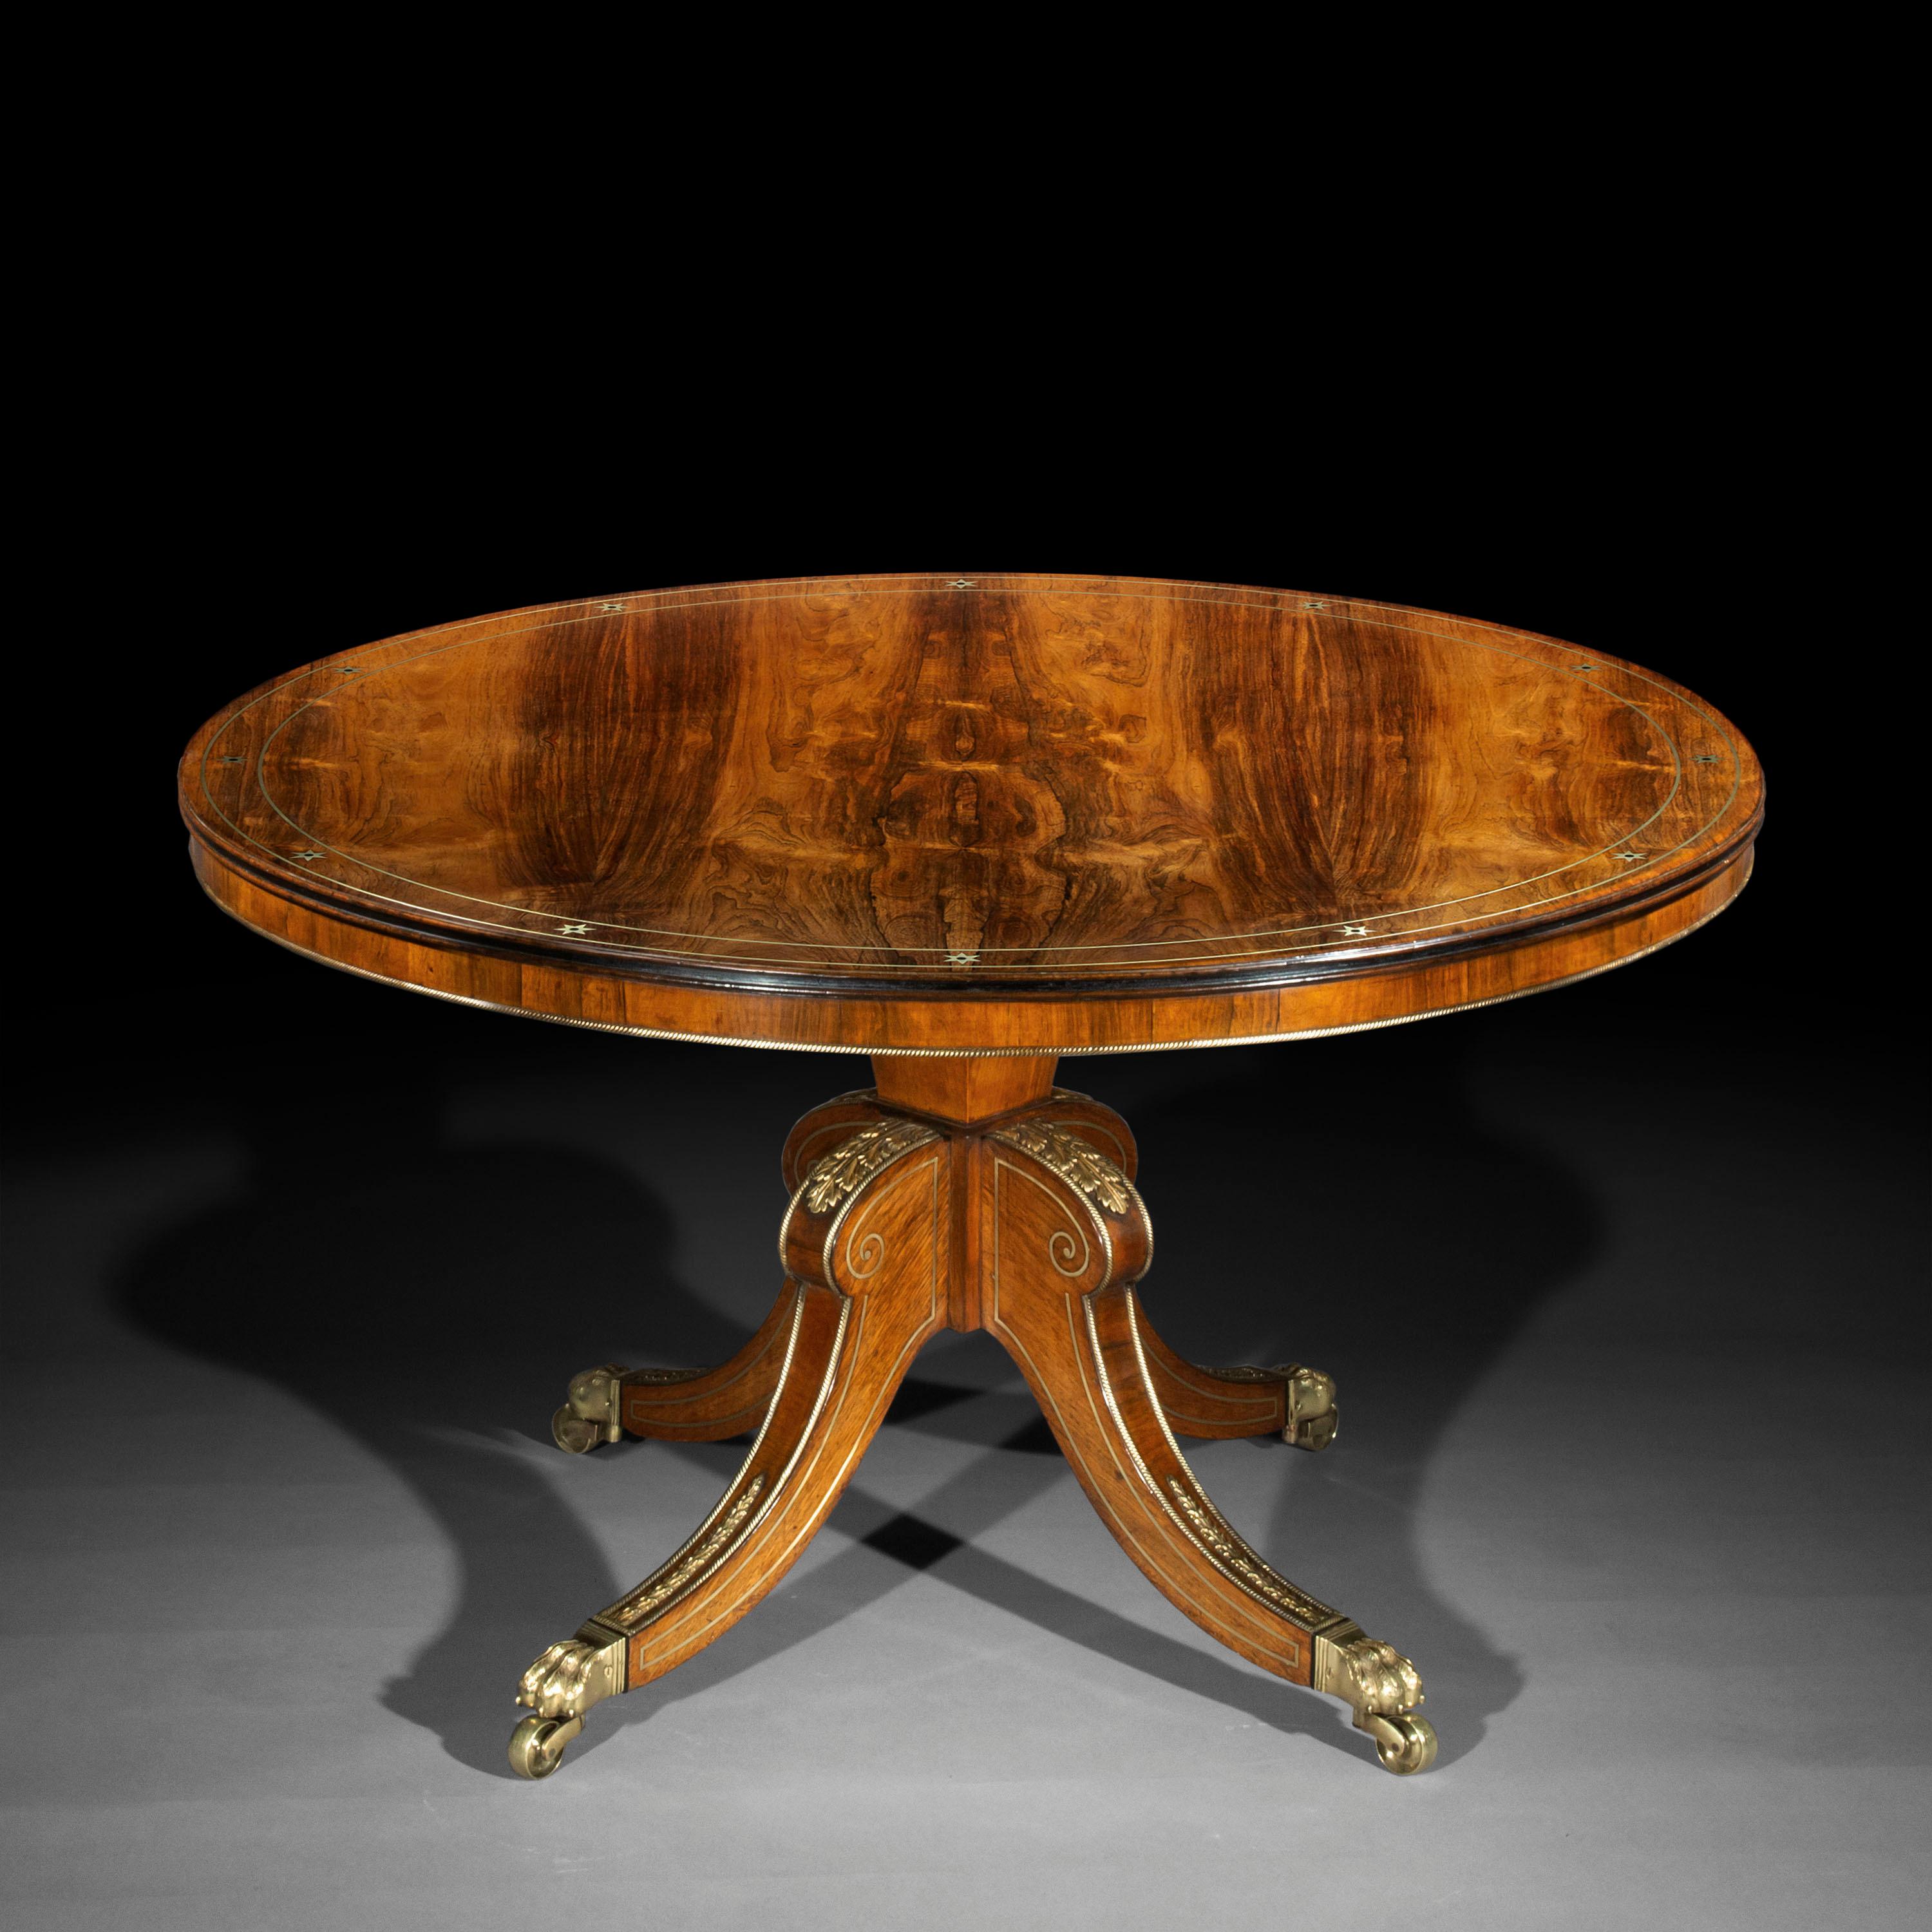 English Antique Regency Center Table, Attributed to George Oakley, circa 1810 For Sale